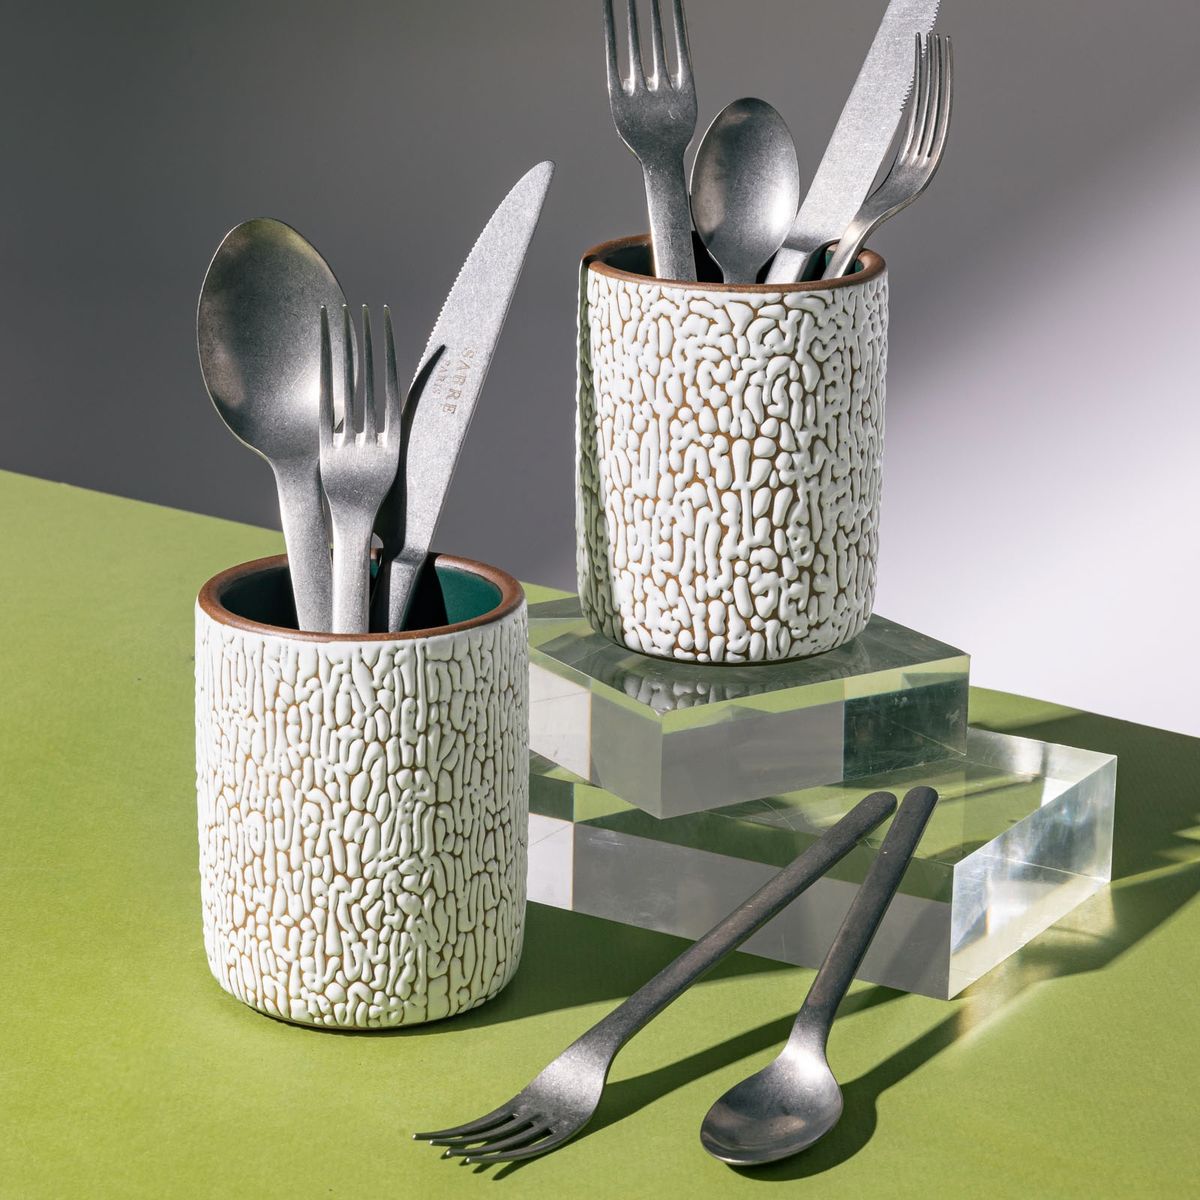 Two medium white ceramic vessel with cracked texture and the interior being dark teal, filled with steel flatware